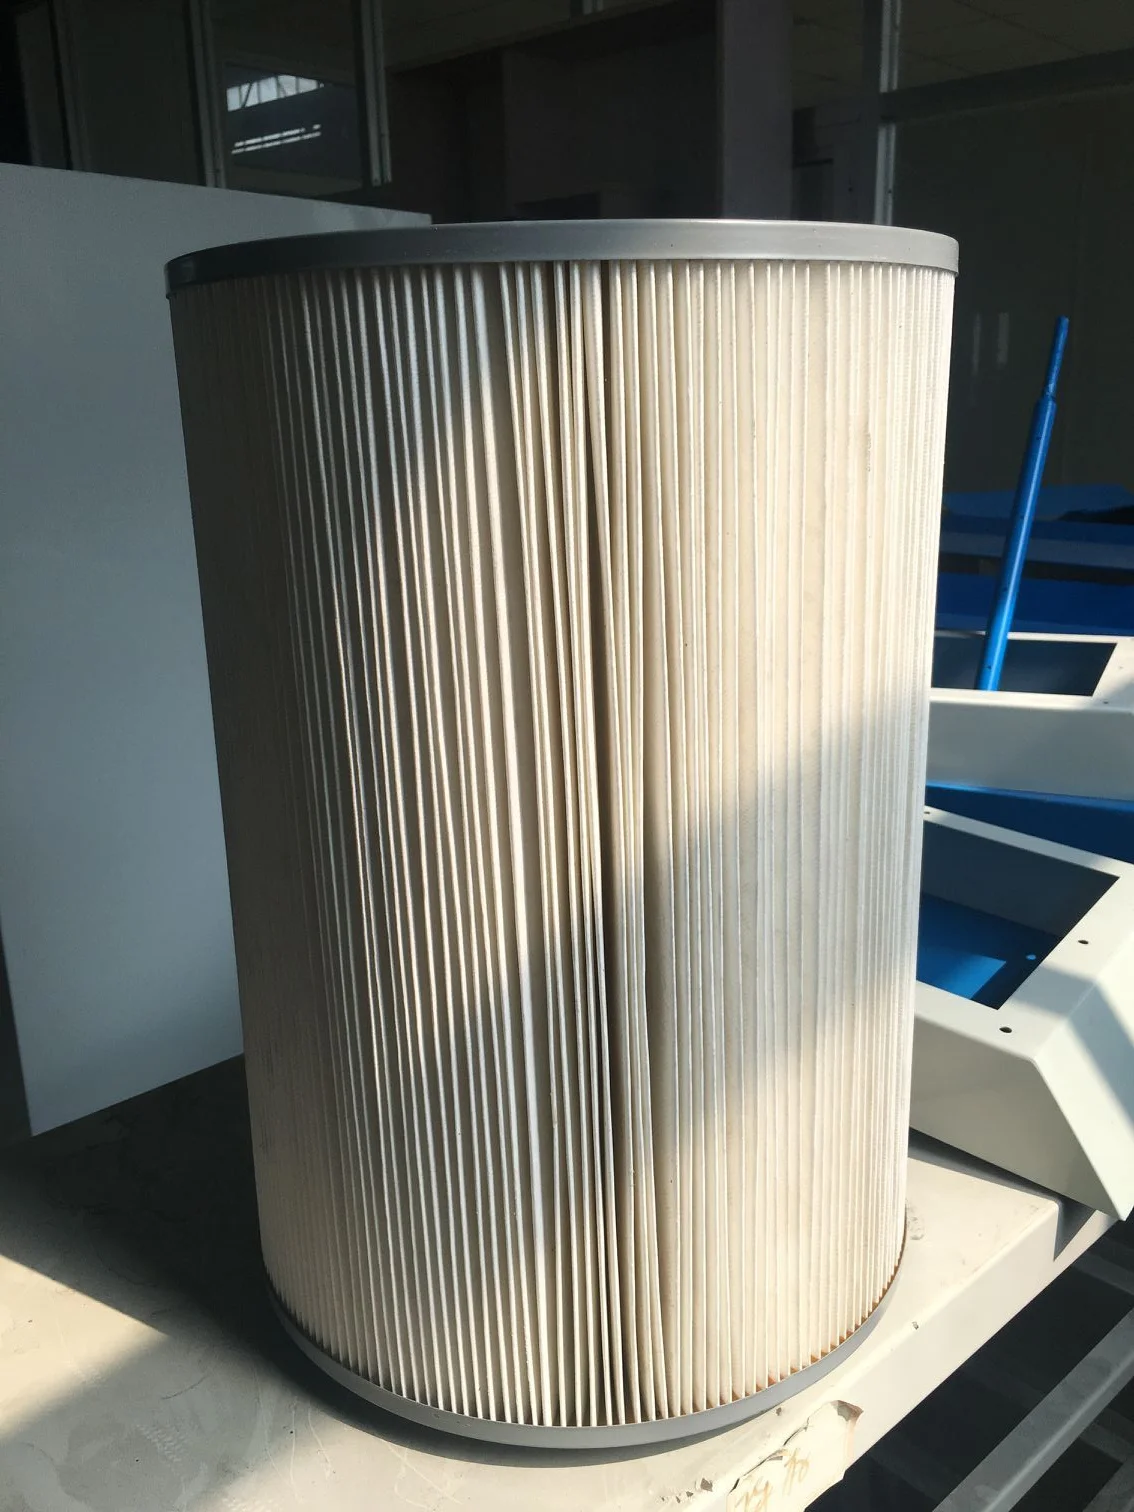 factory price powder coating air cartridge filter for  pulse cleaning dust collector system